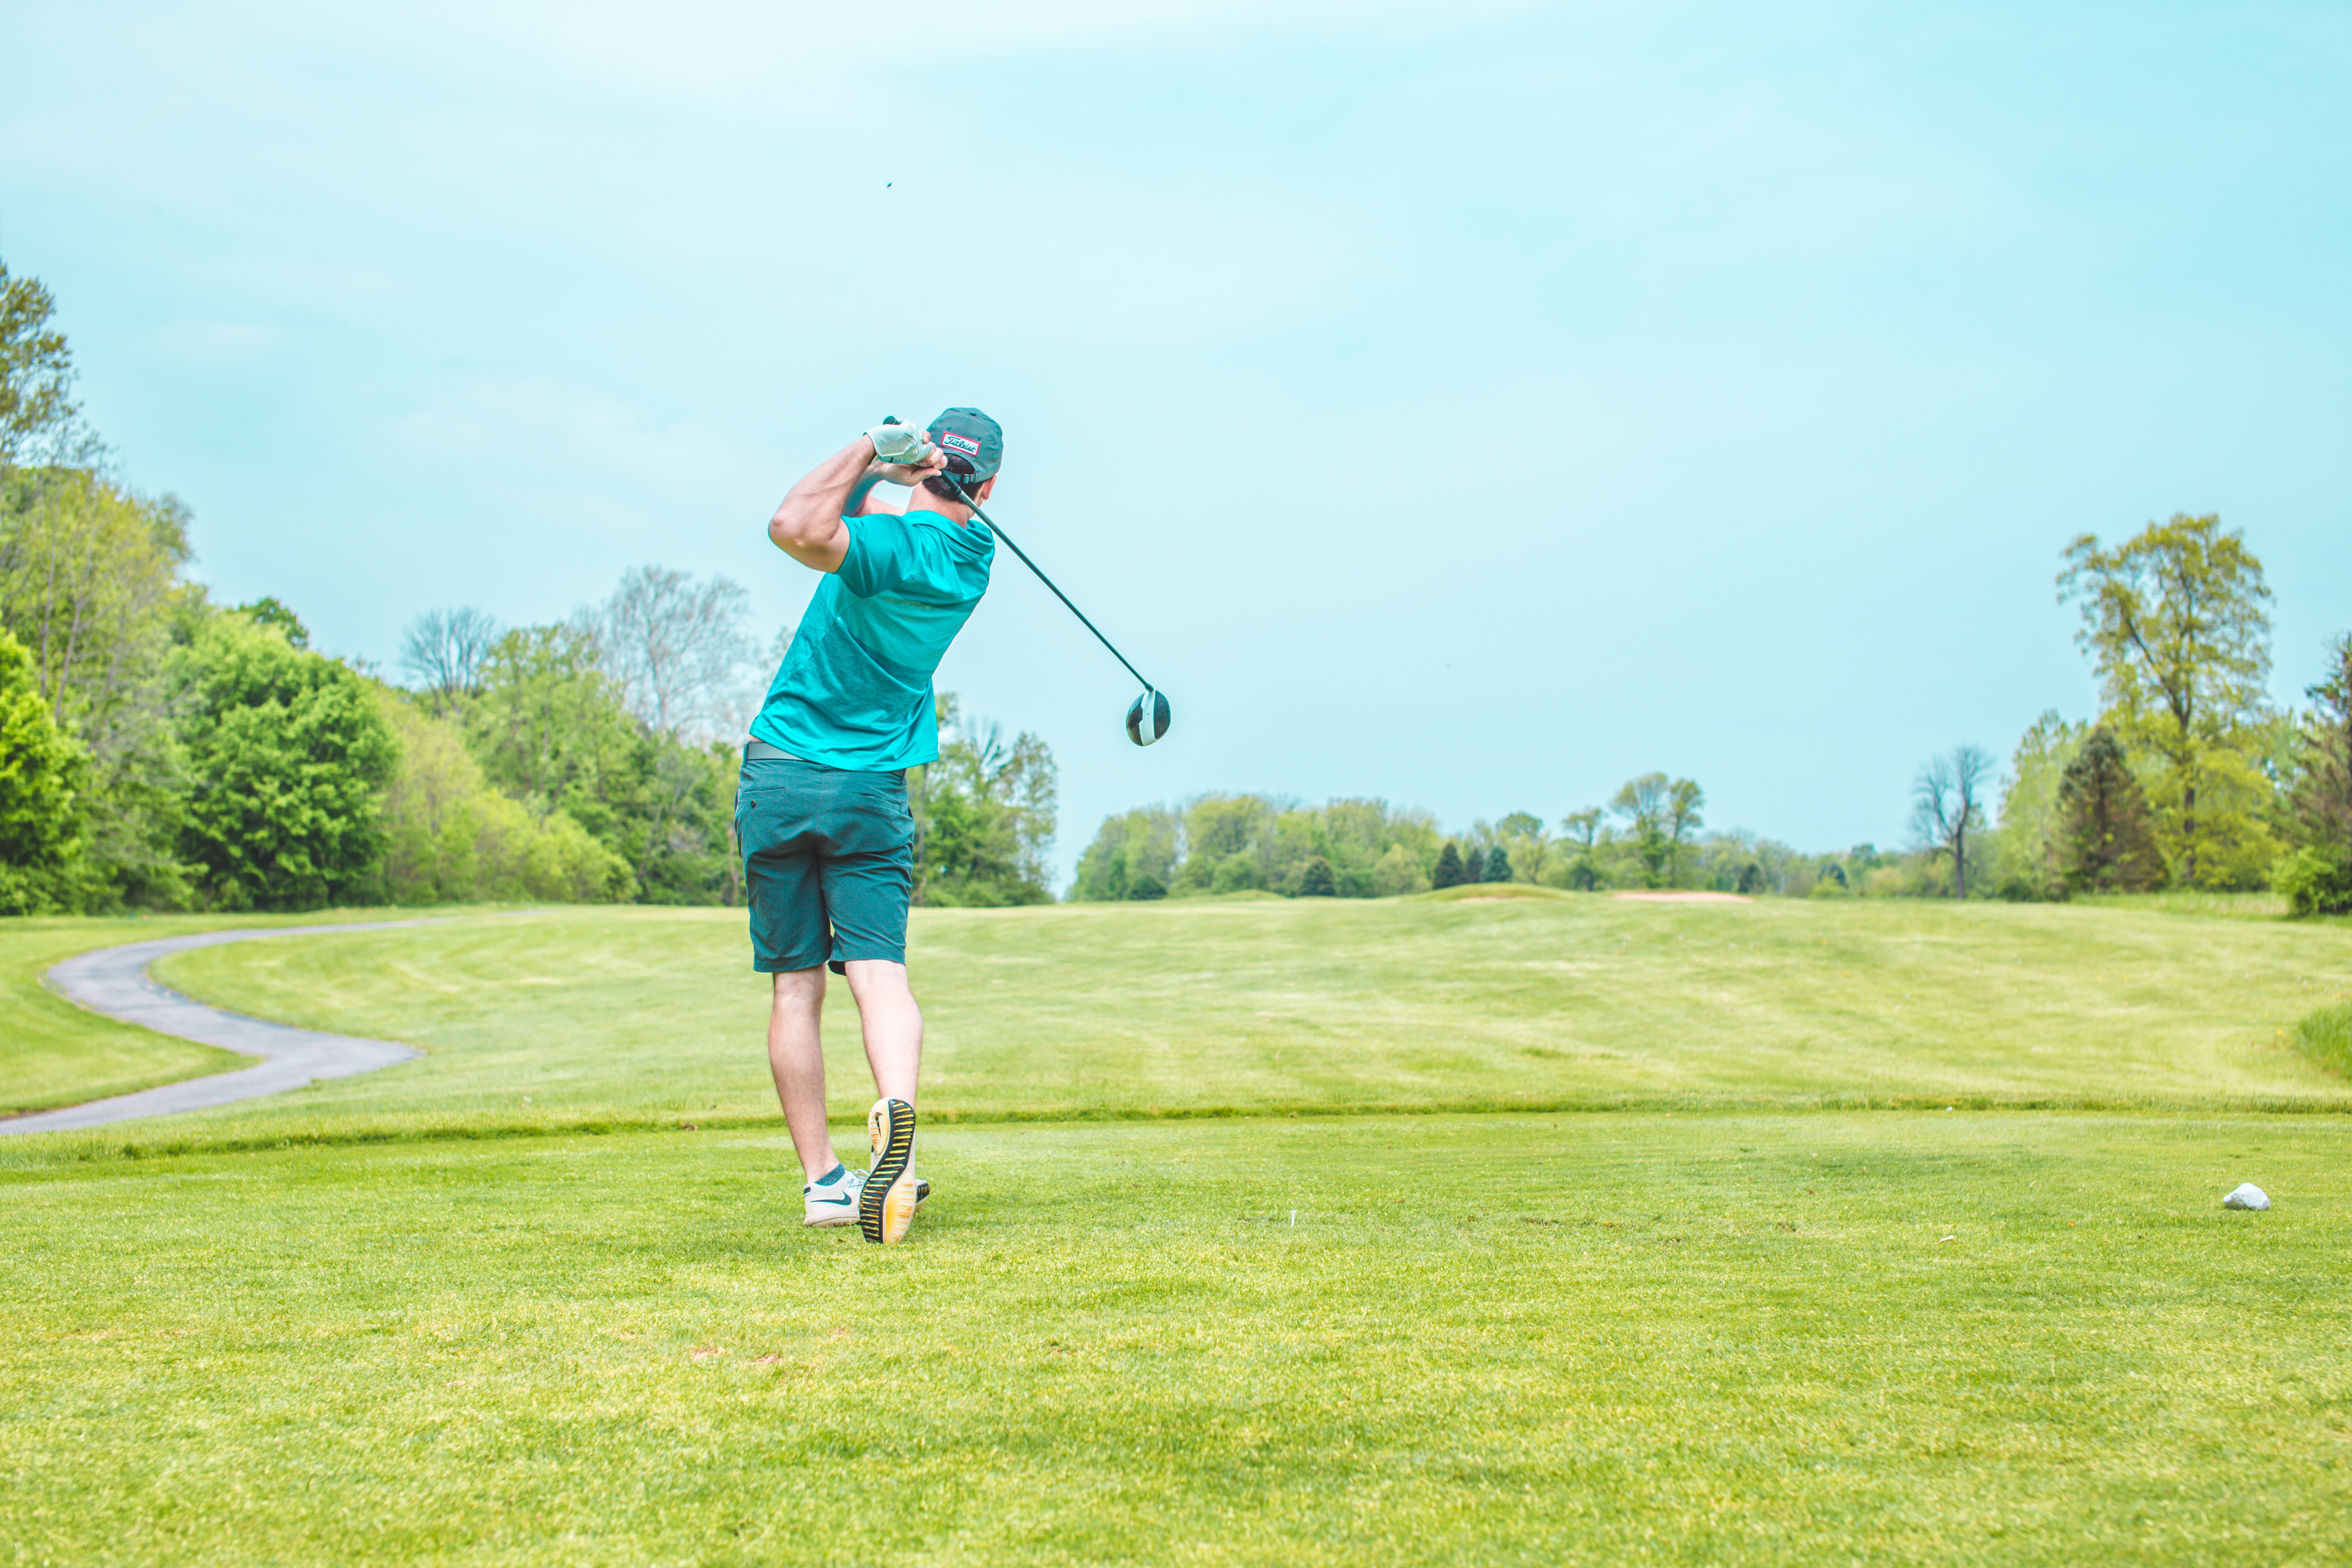 Man playing golf at a youth sports team fundraiser tournament